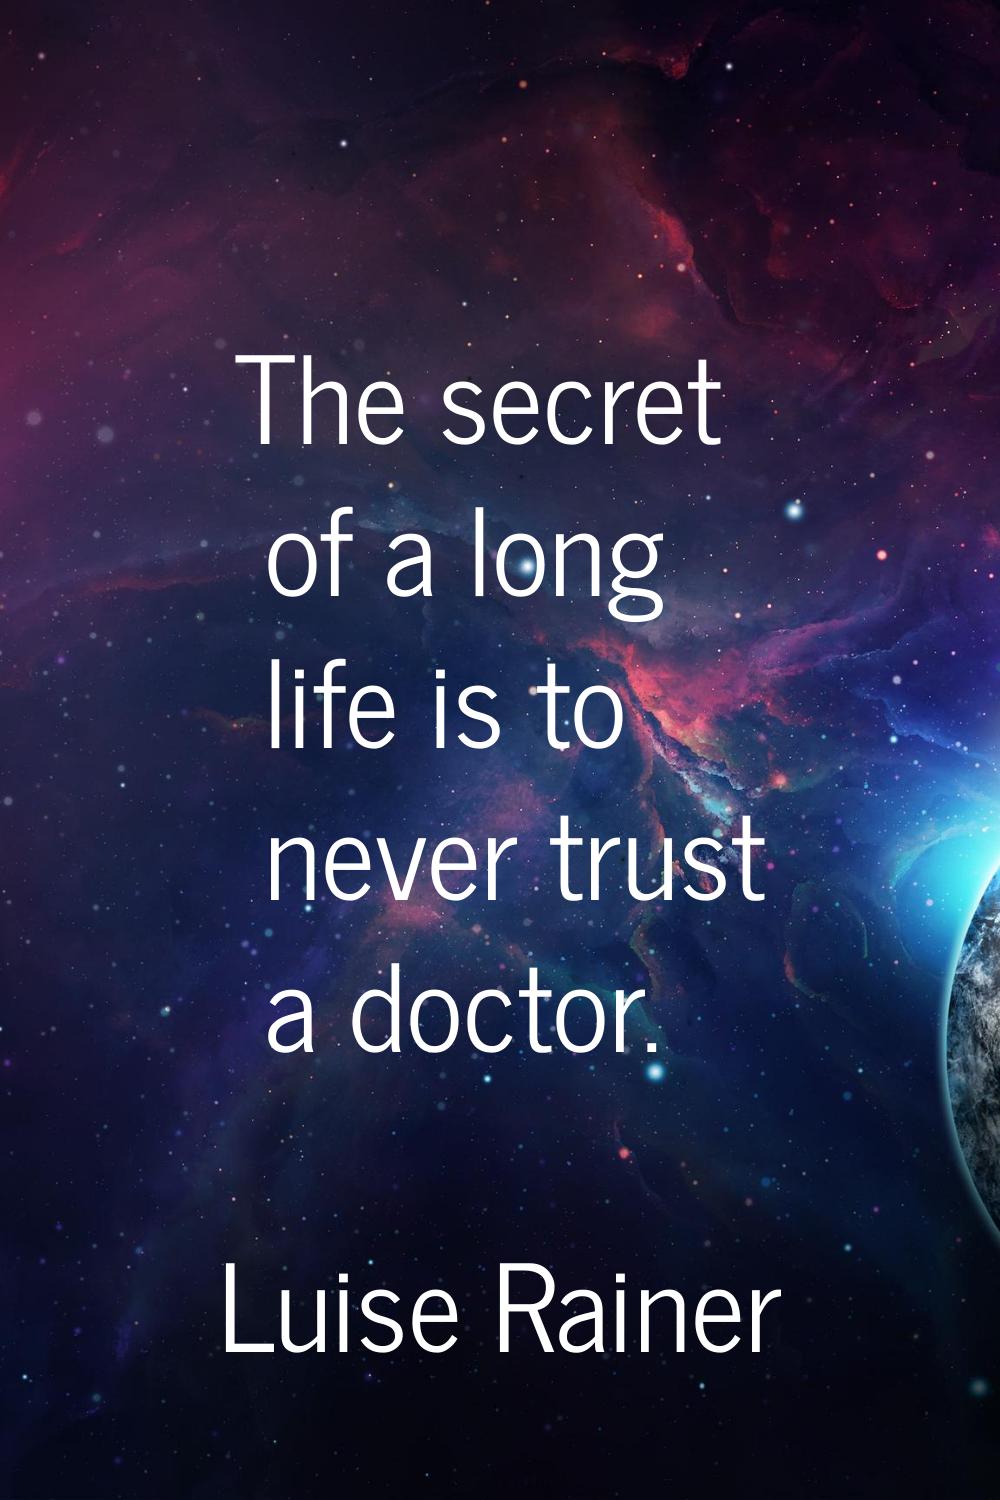 The secret of a long life is to never trust a doctor.